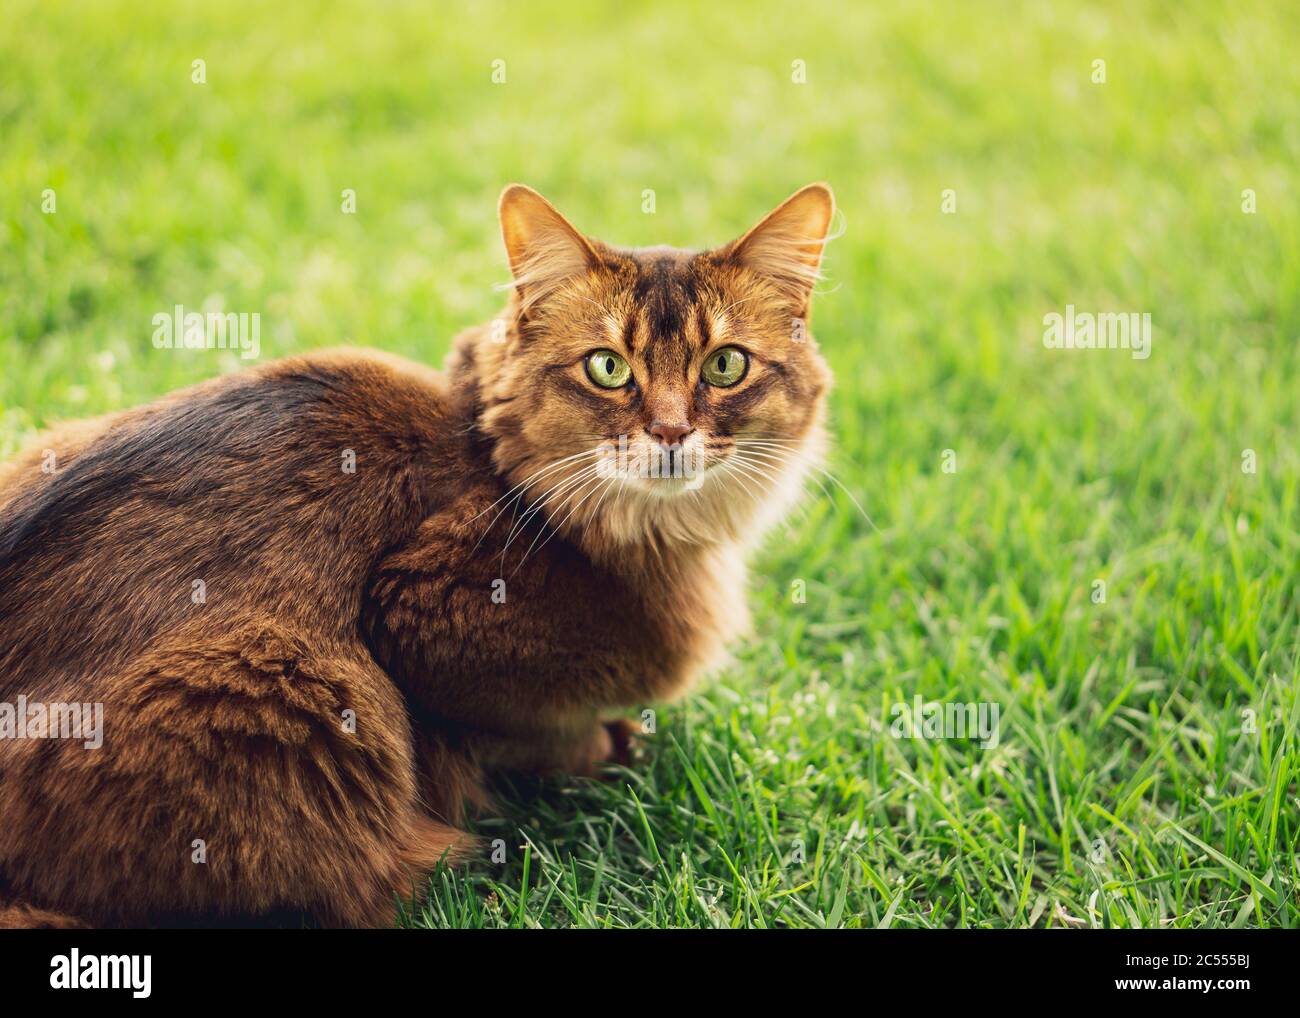 34+ How much does a somali cat cost Cat Images [HD]